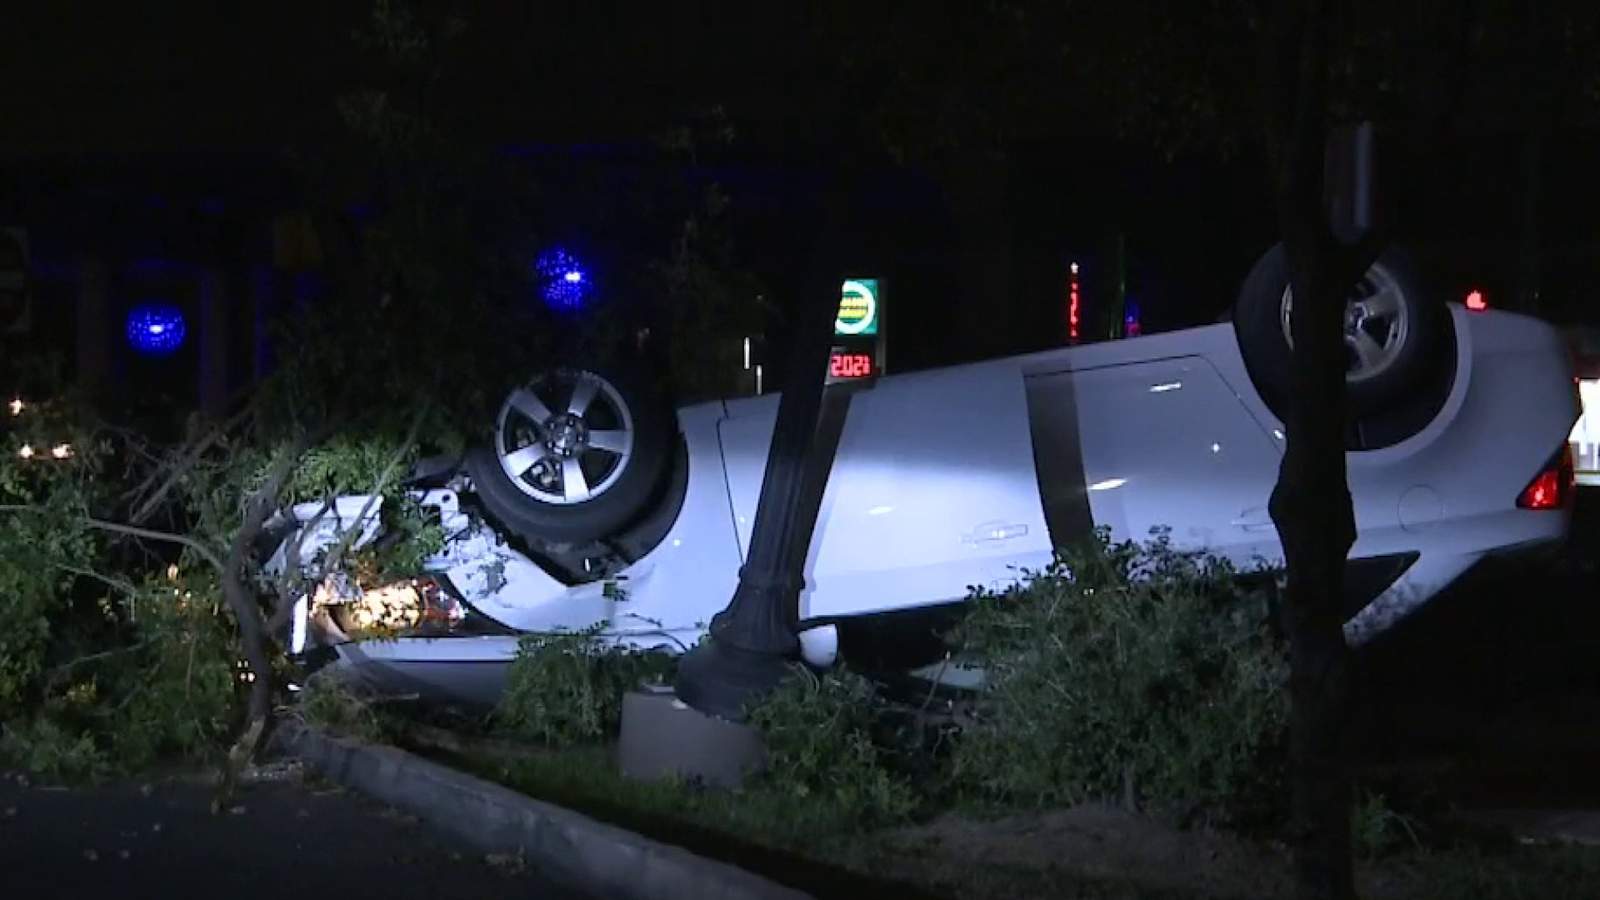 Man arrested on suspicion of DWI after crashing car in Taco Cabana parking lot, police say